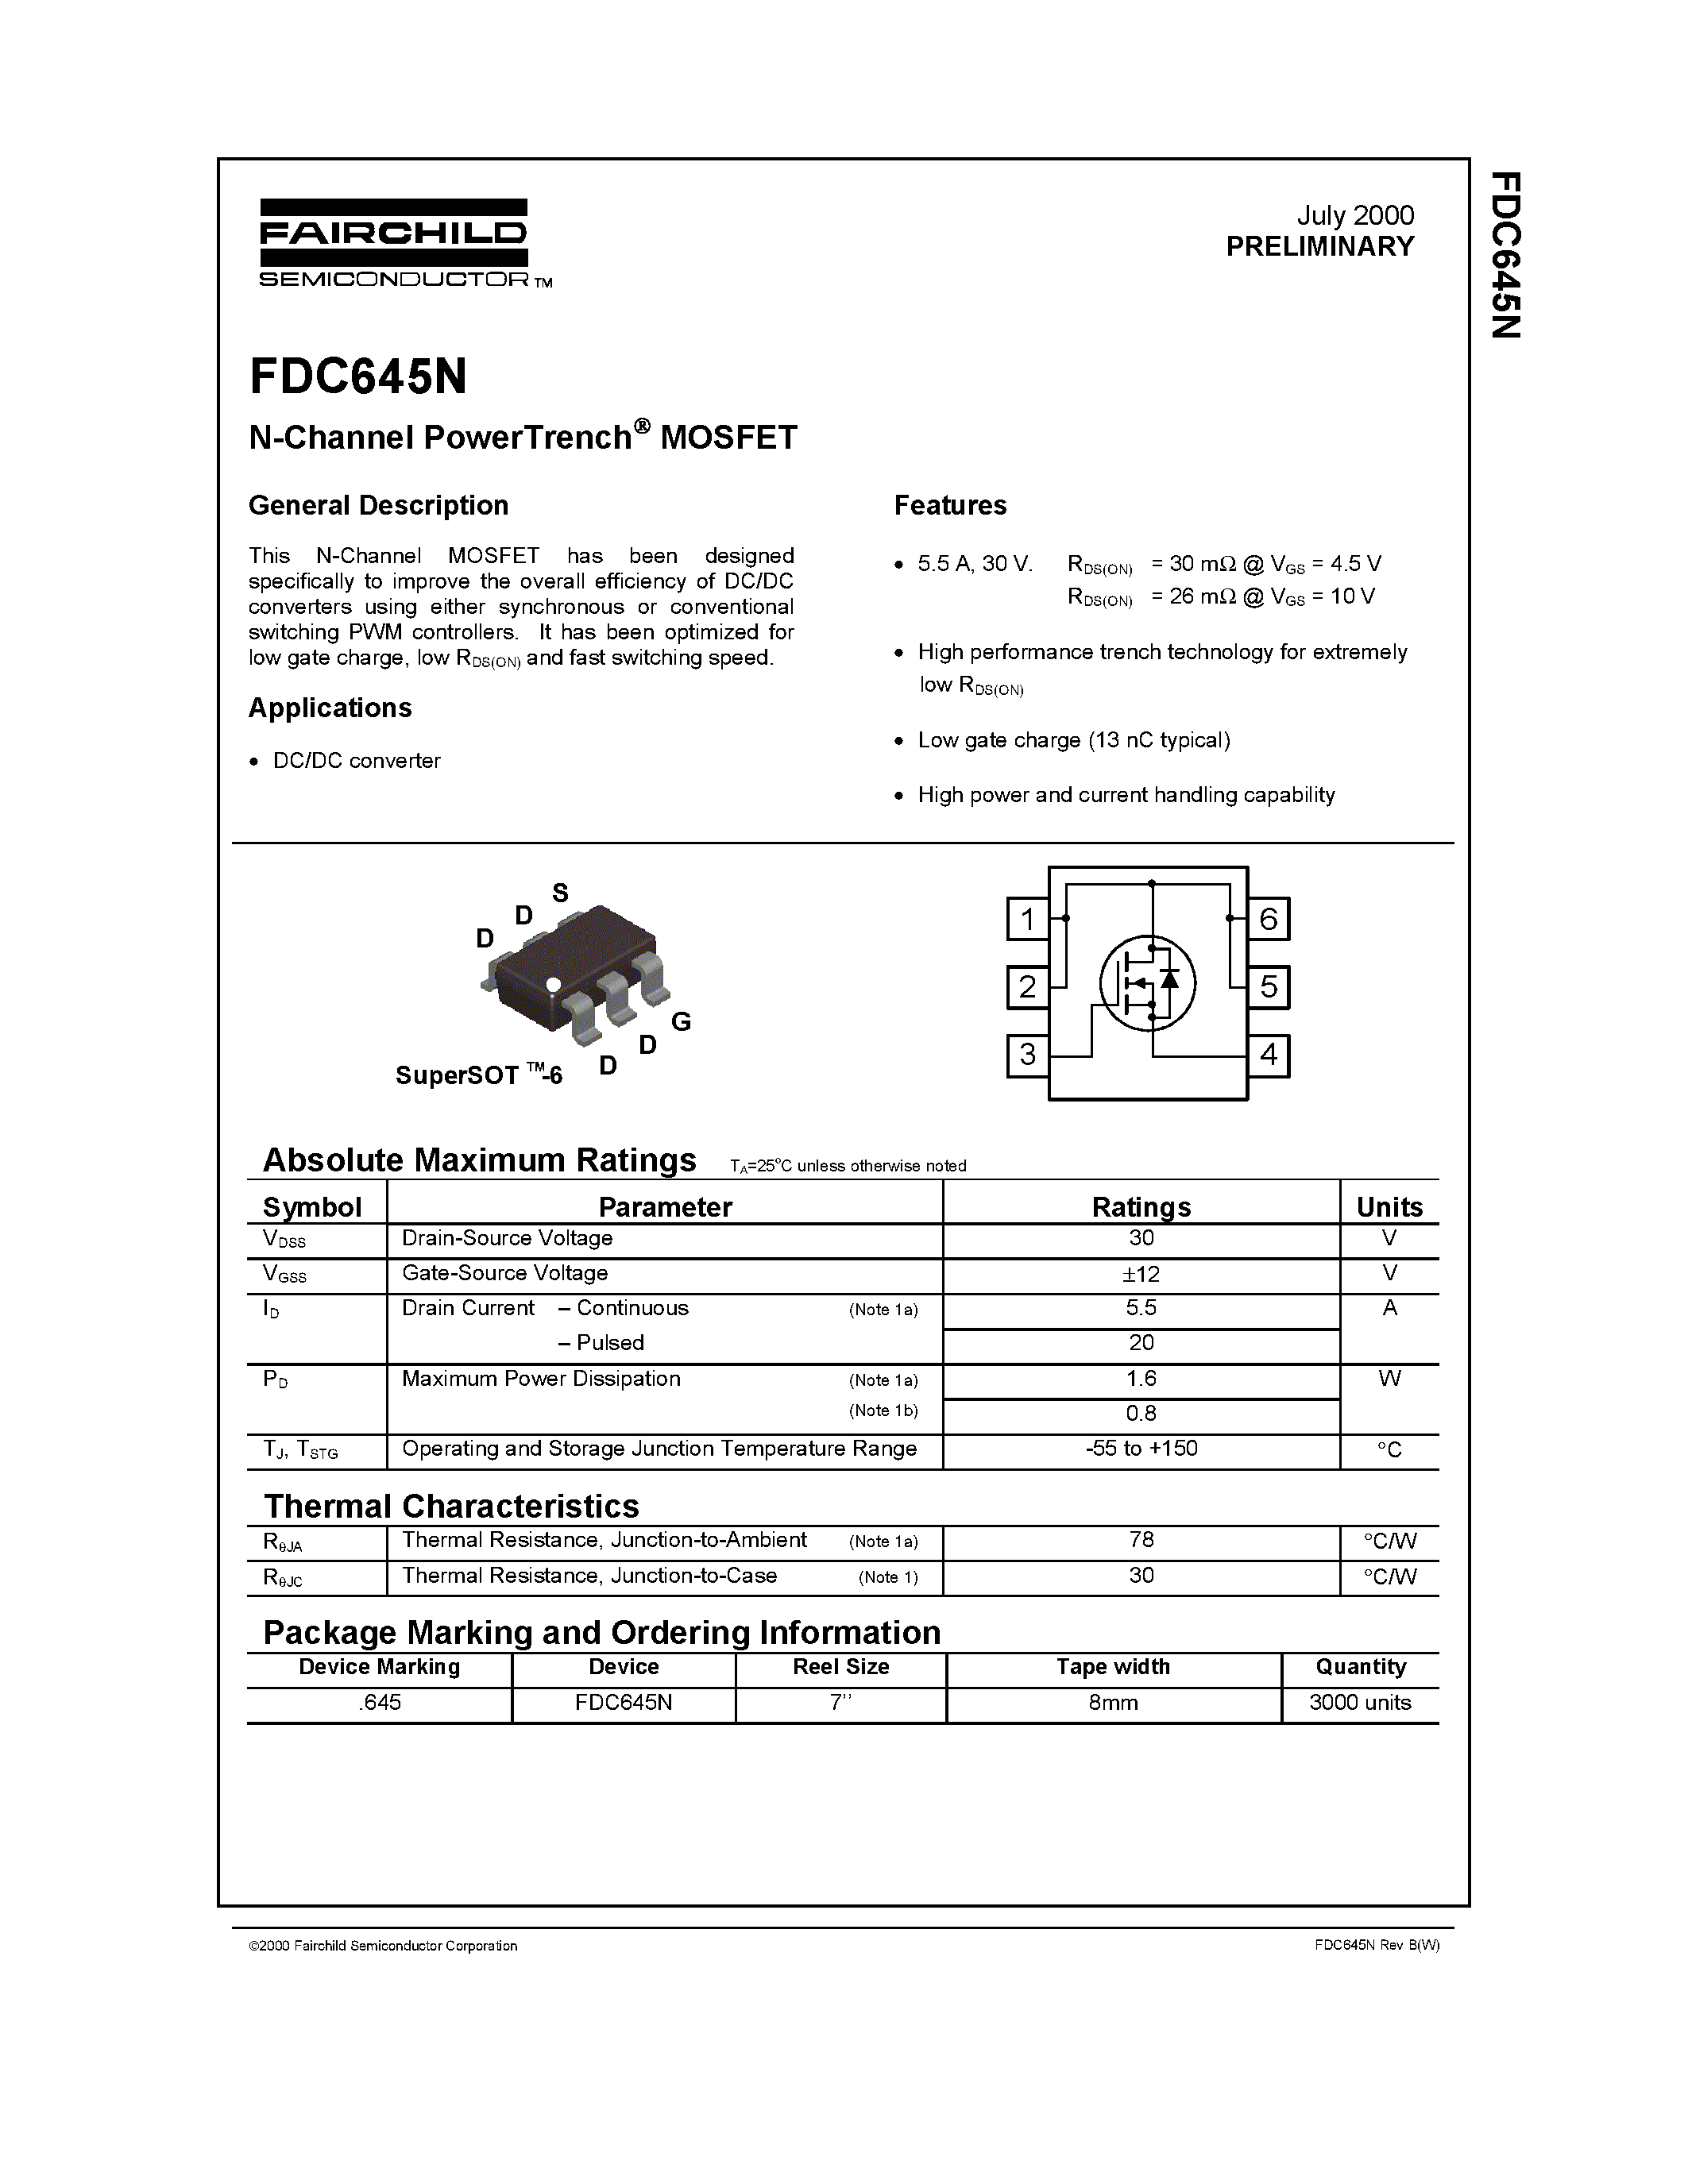 Datasheet FDC645N - N-Channel PowerTrench MOSFET page 1